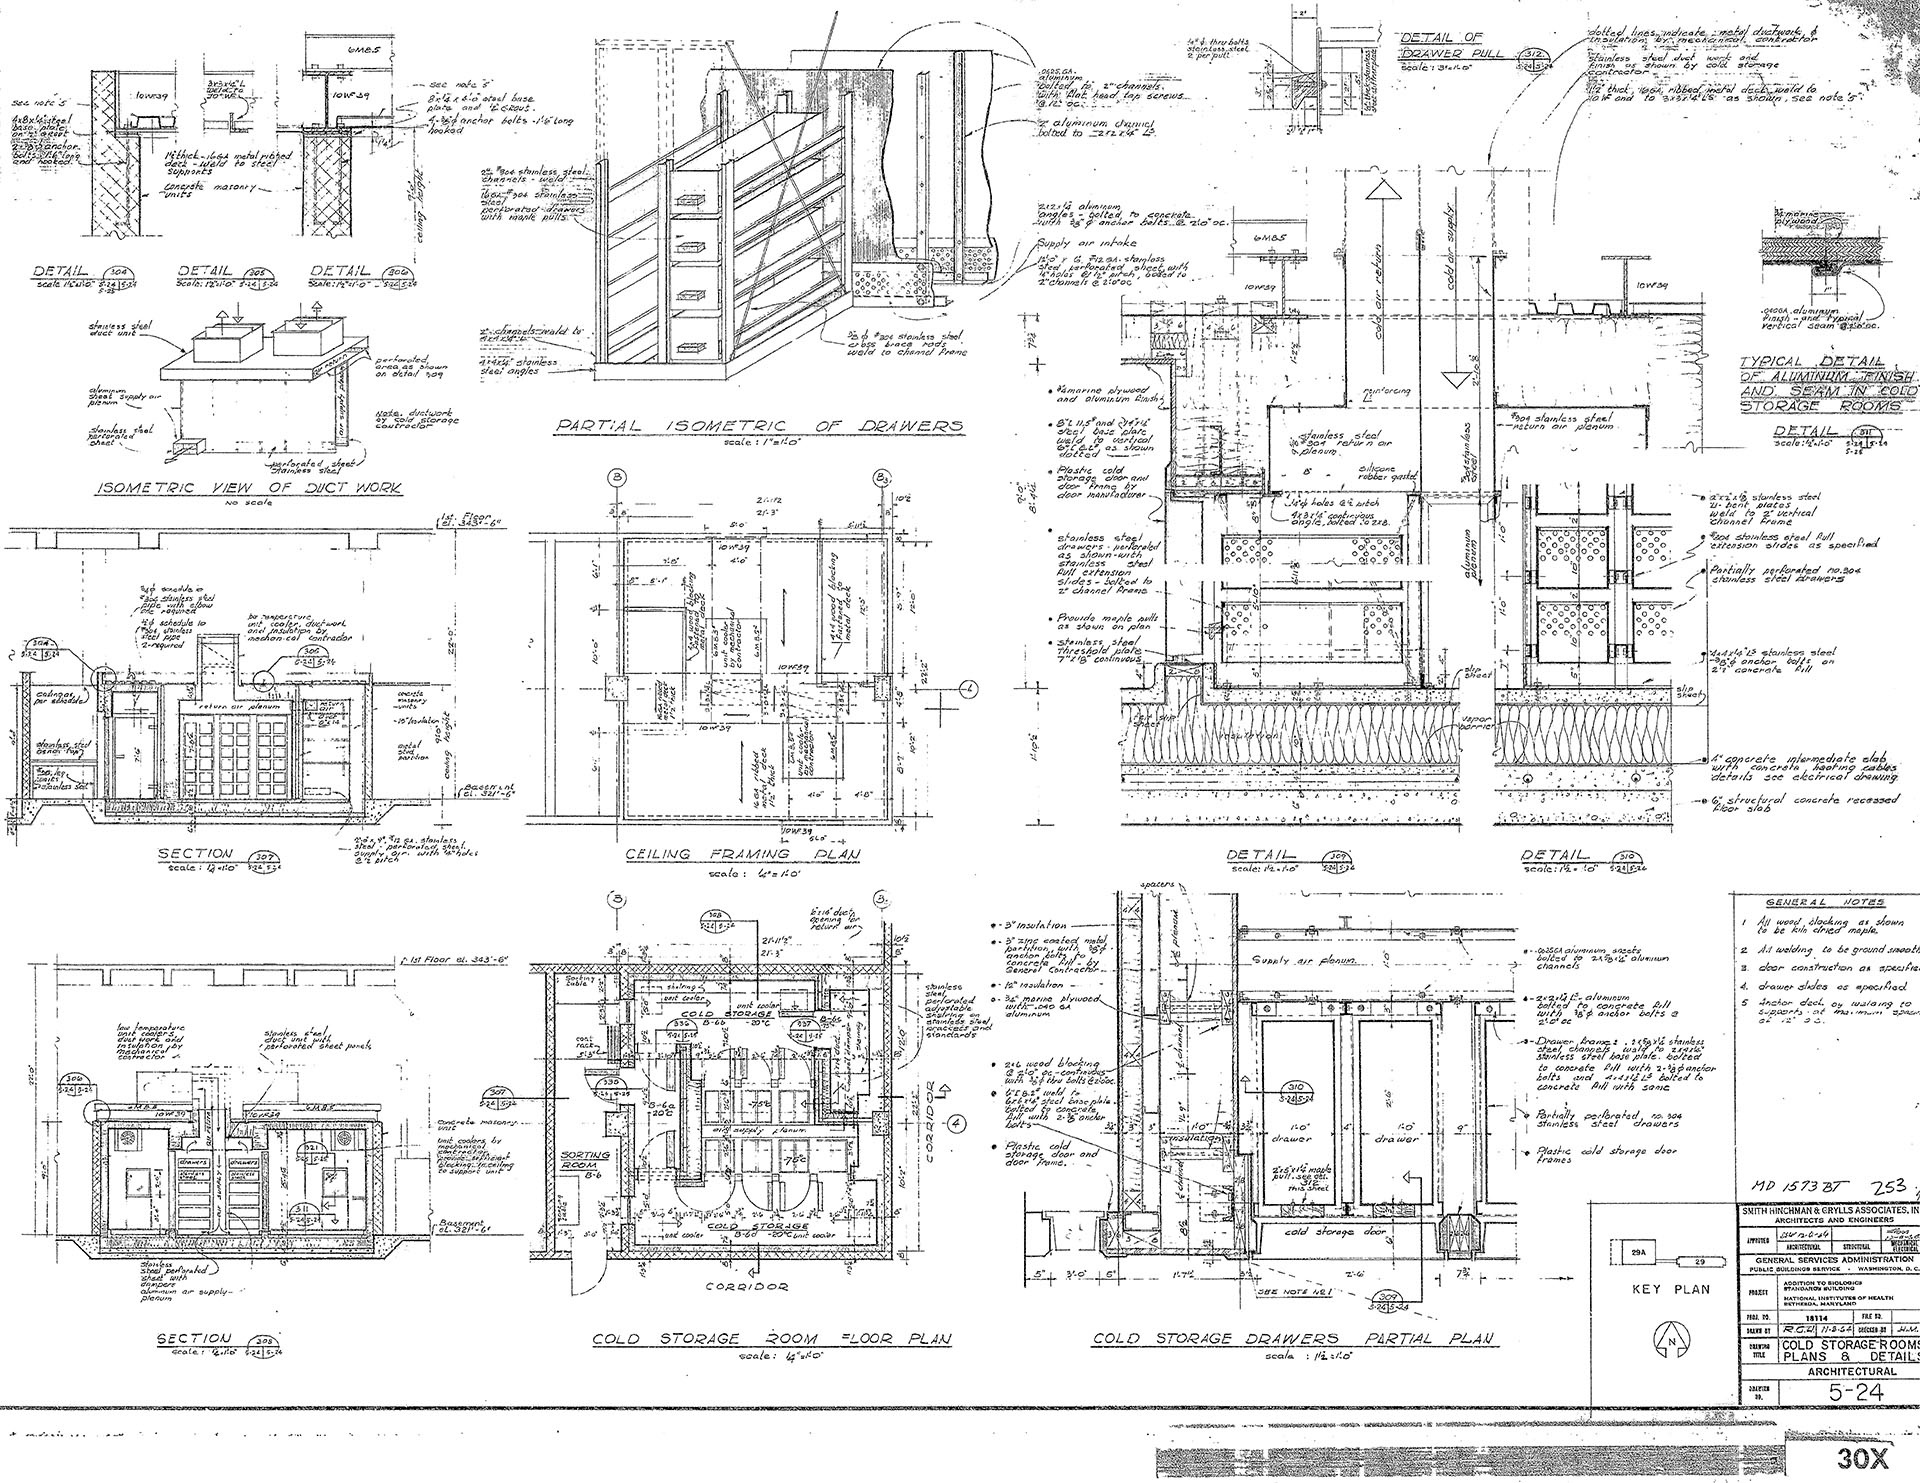 Details drawing of cold rooms in Building 29A.